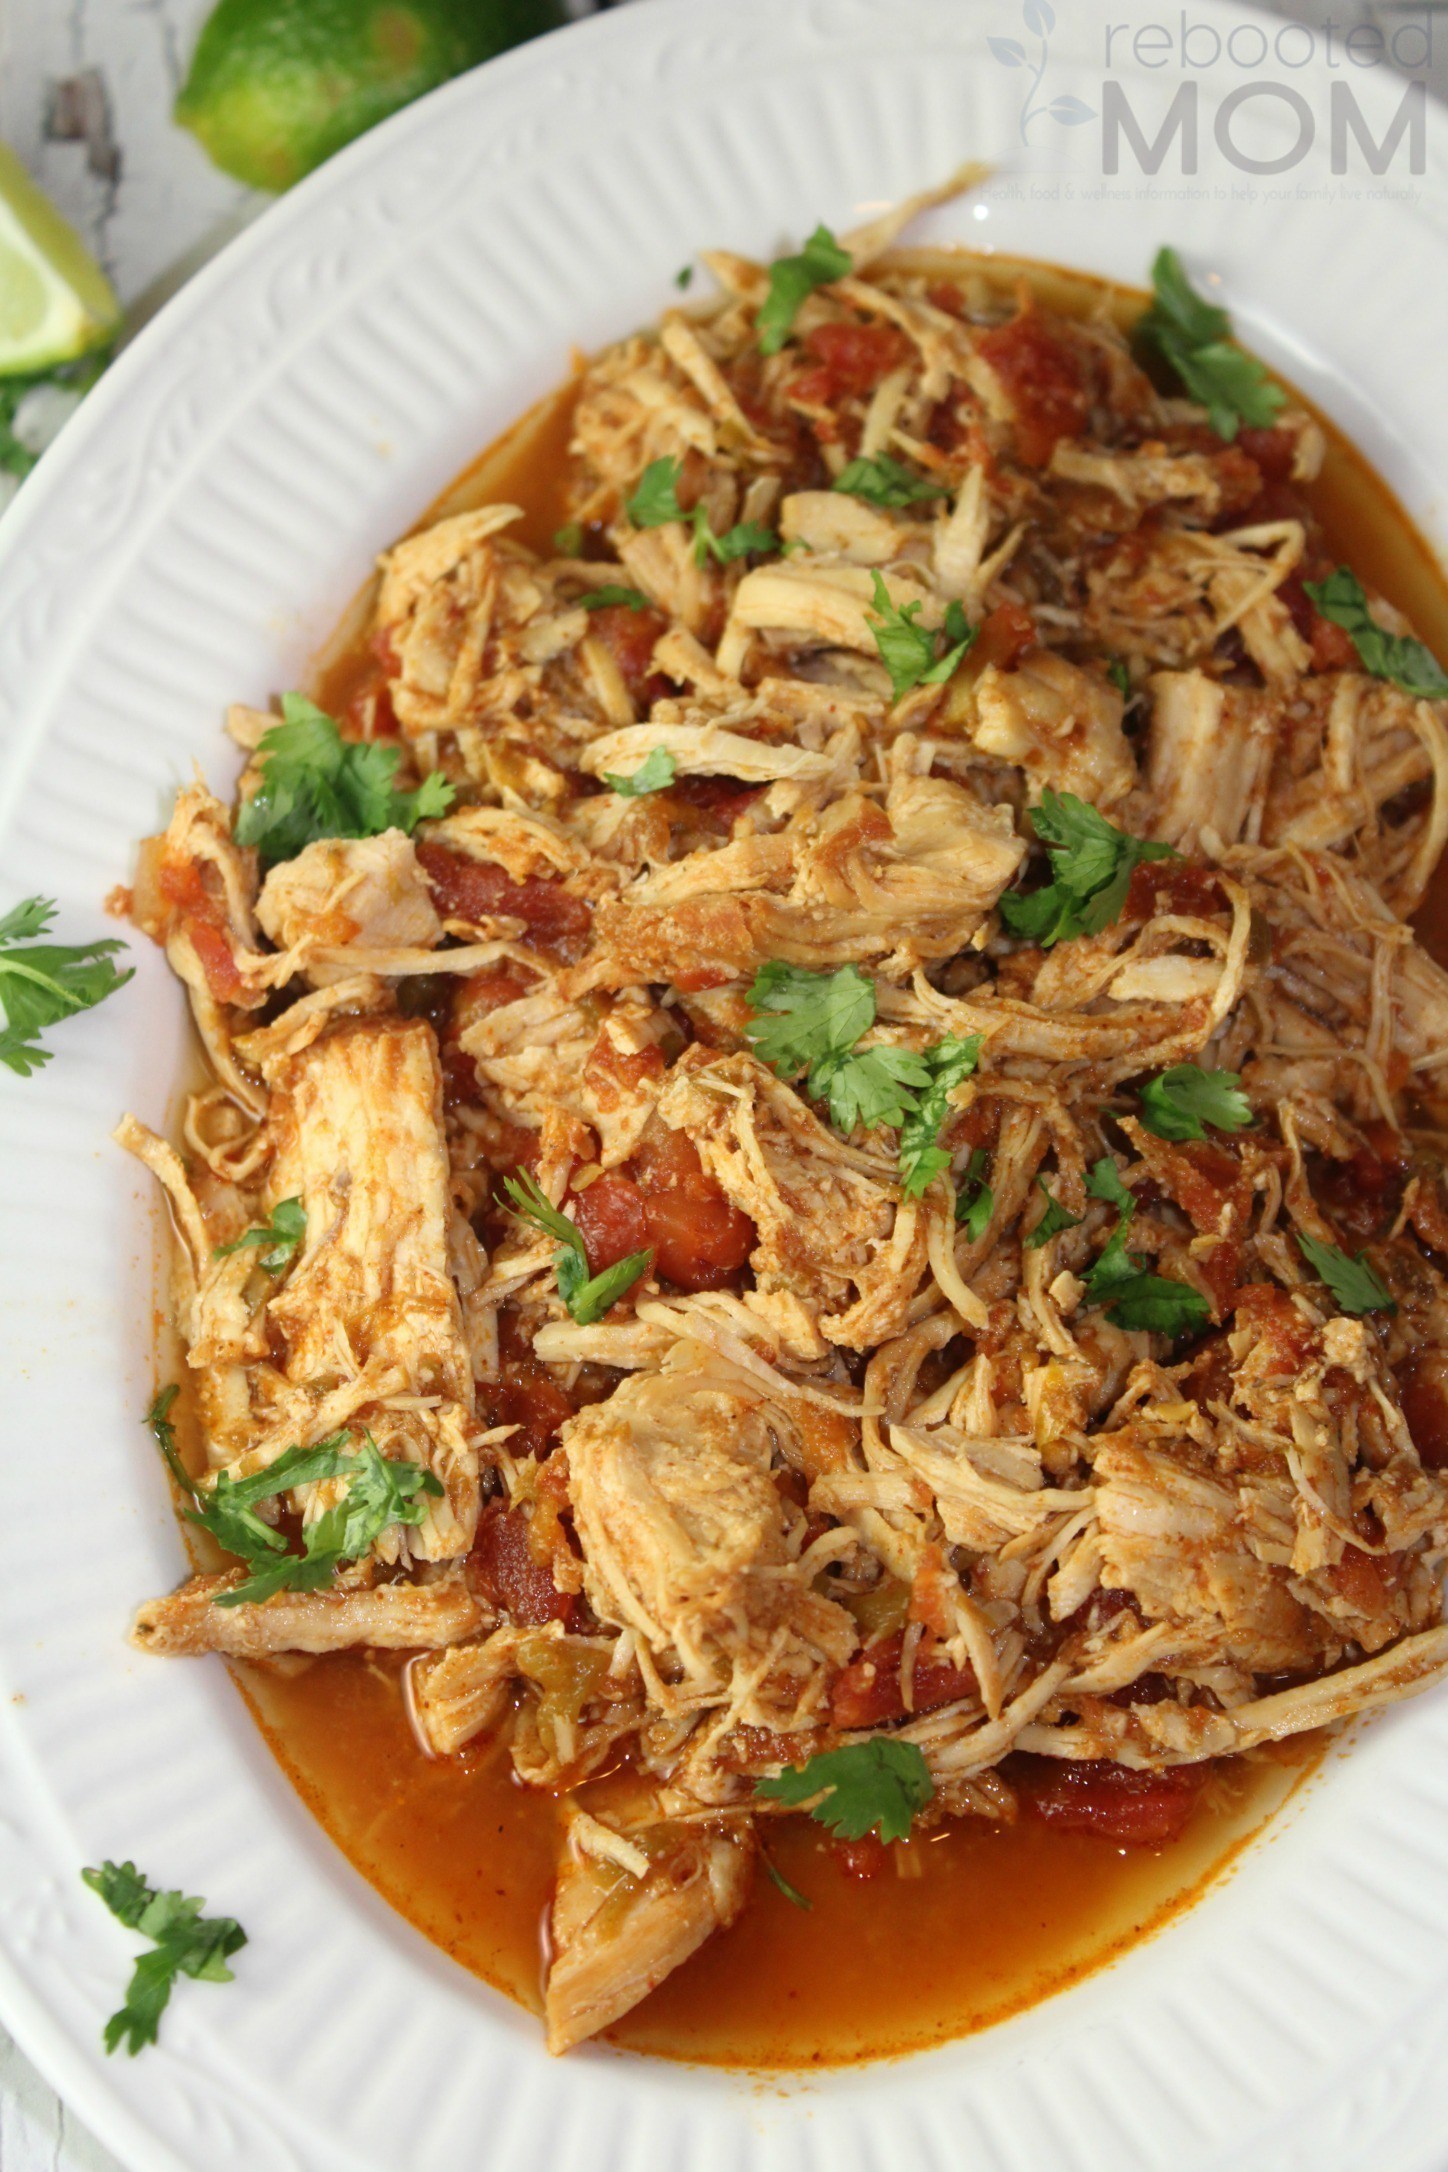 Pressure cooker shredded mexican chicken